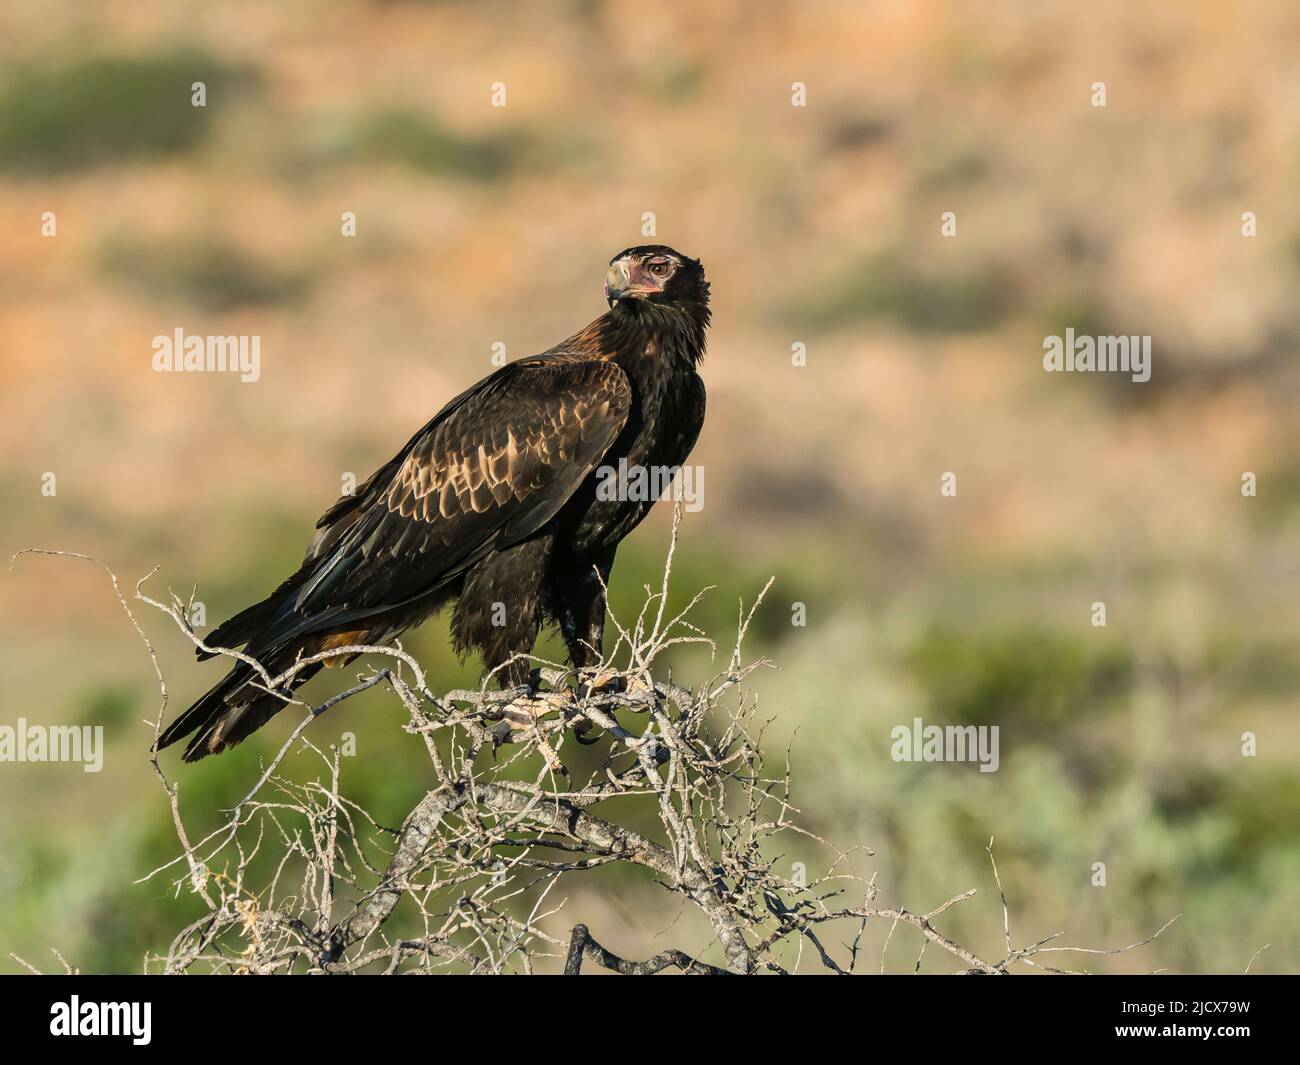 Adult wedge-tailed eagle (Aquila audax), on perch in Cape Range National Park, Western Australia, Australia, Pacific Stock Photo